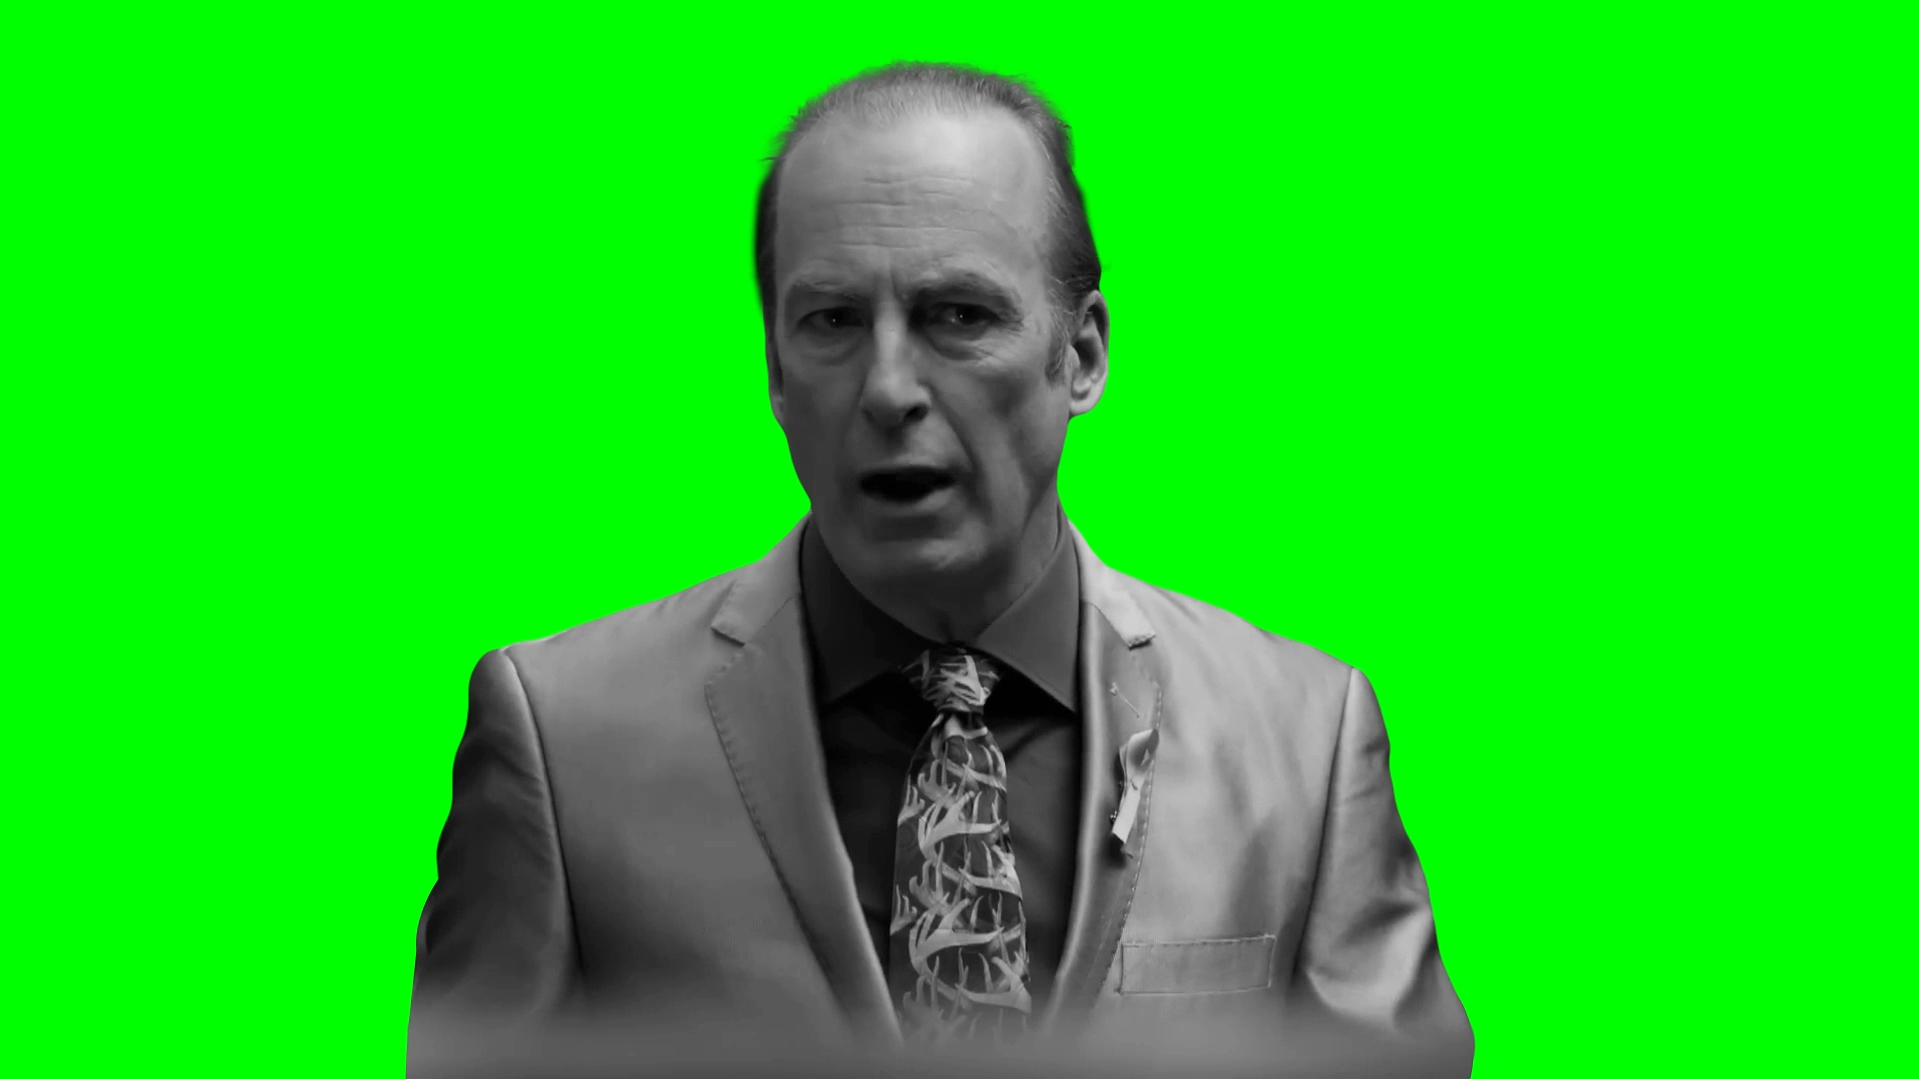 Walter White couldn’t have done it without me! - Better Call Saul meme (Green Screen)